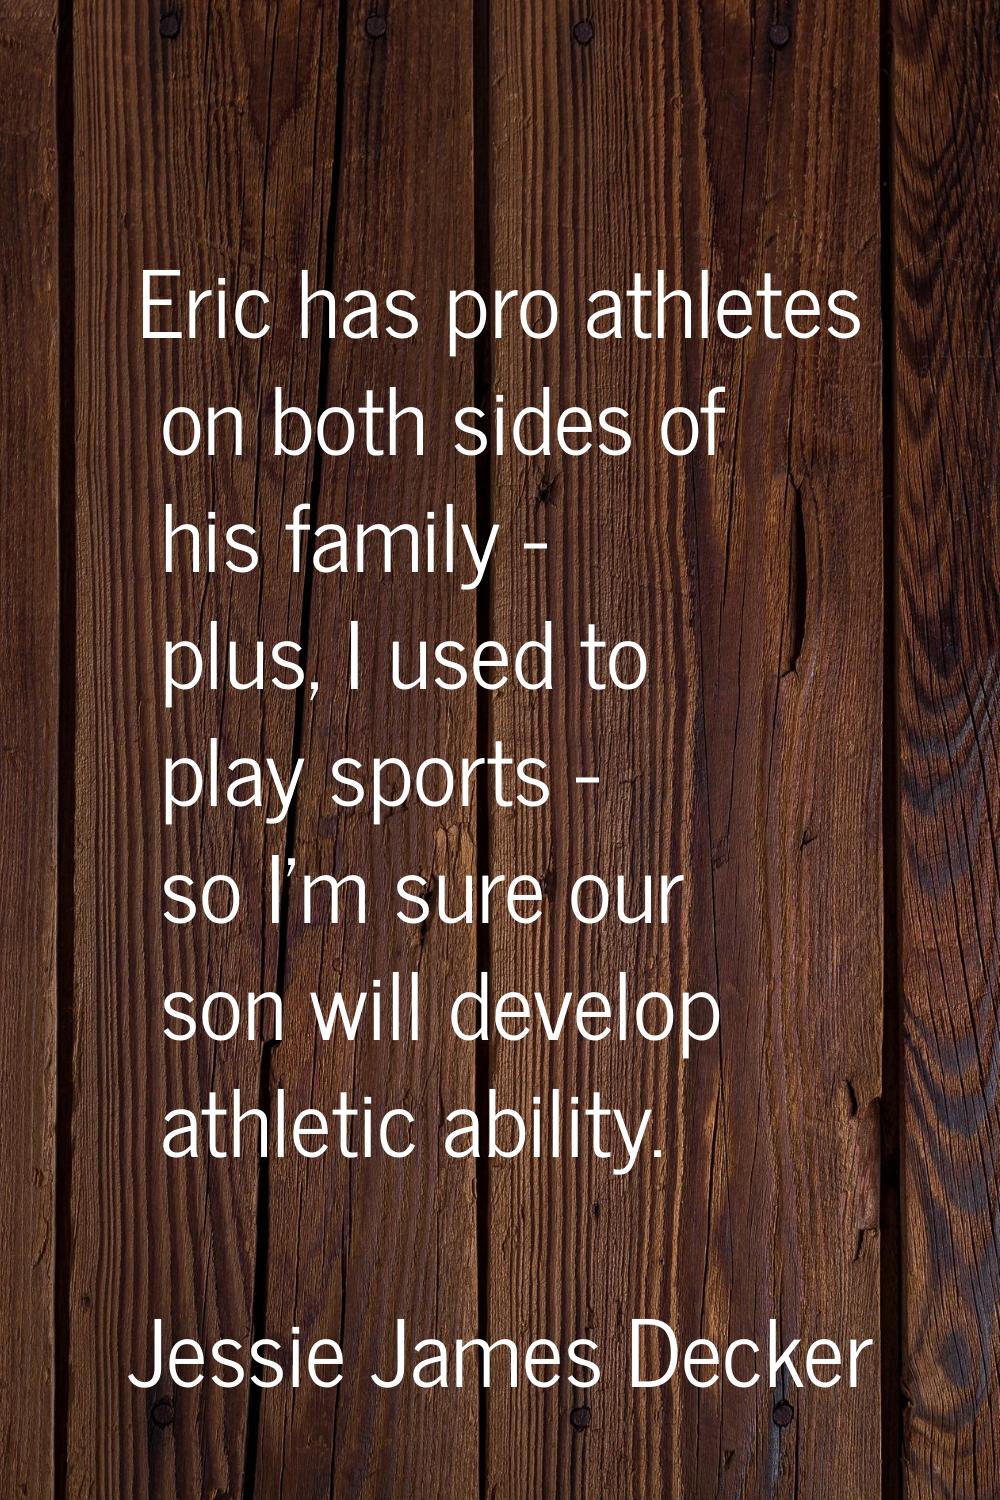 Eric has pro athletes on both sides of his family - plus, I used to play sports - so I'm sure our s